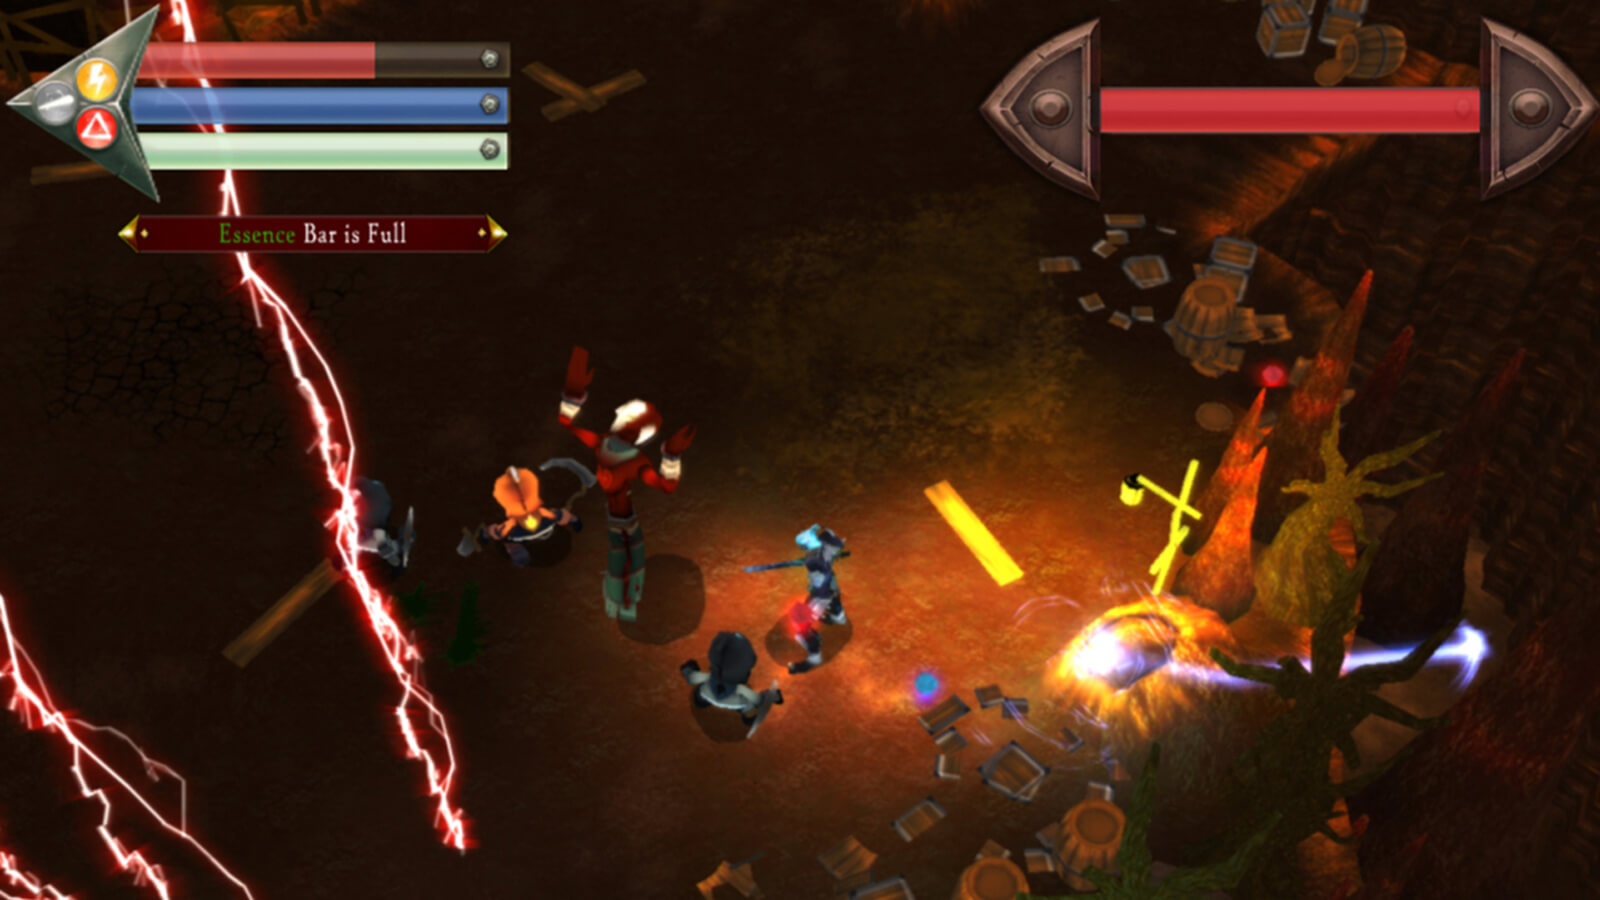 Red lightning bolts hit the ground as the player battles several unique enemies